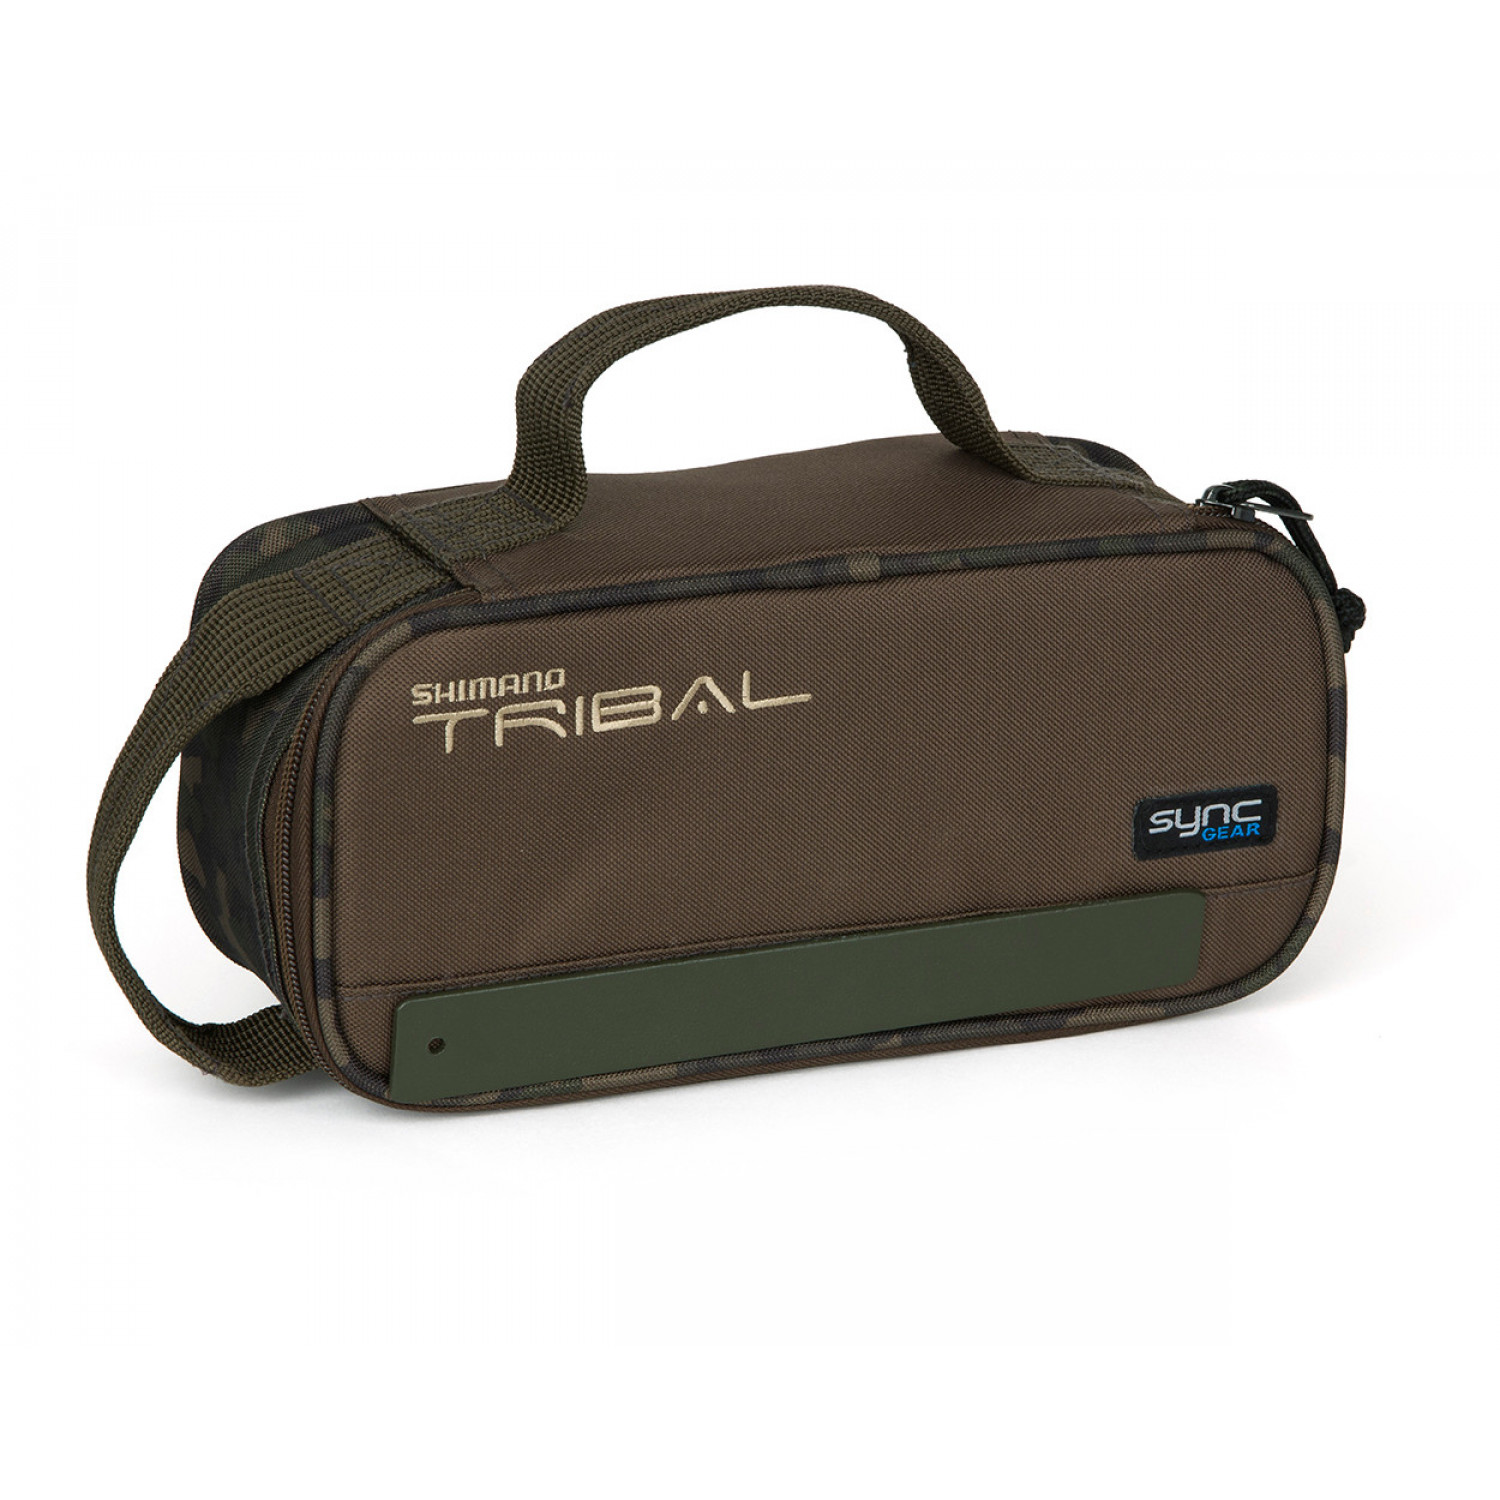 Shimano Tribal Sync Gear Magnetic Security Case, 27x12.5x10cm, SHTSC05